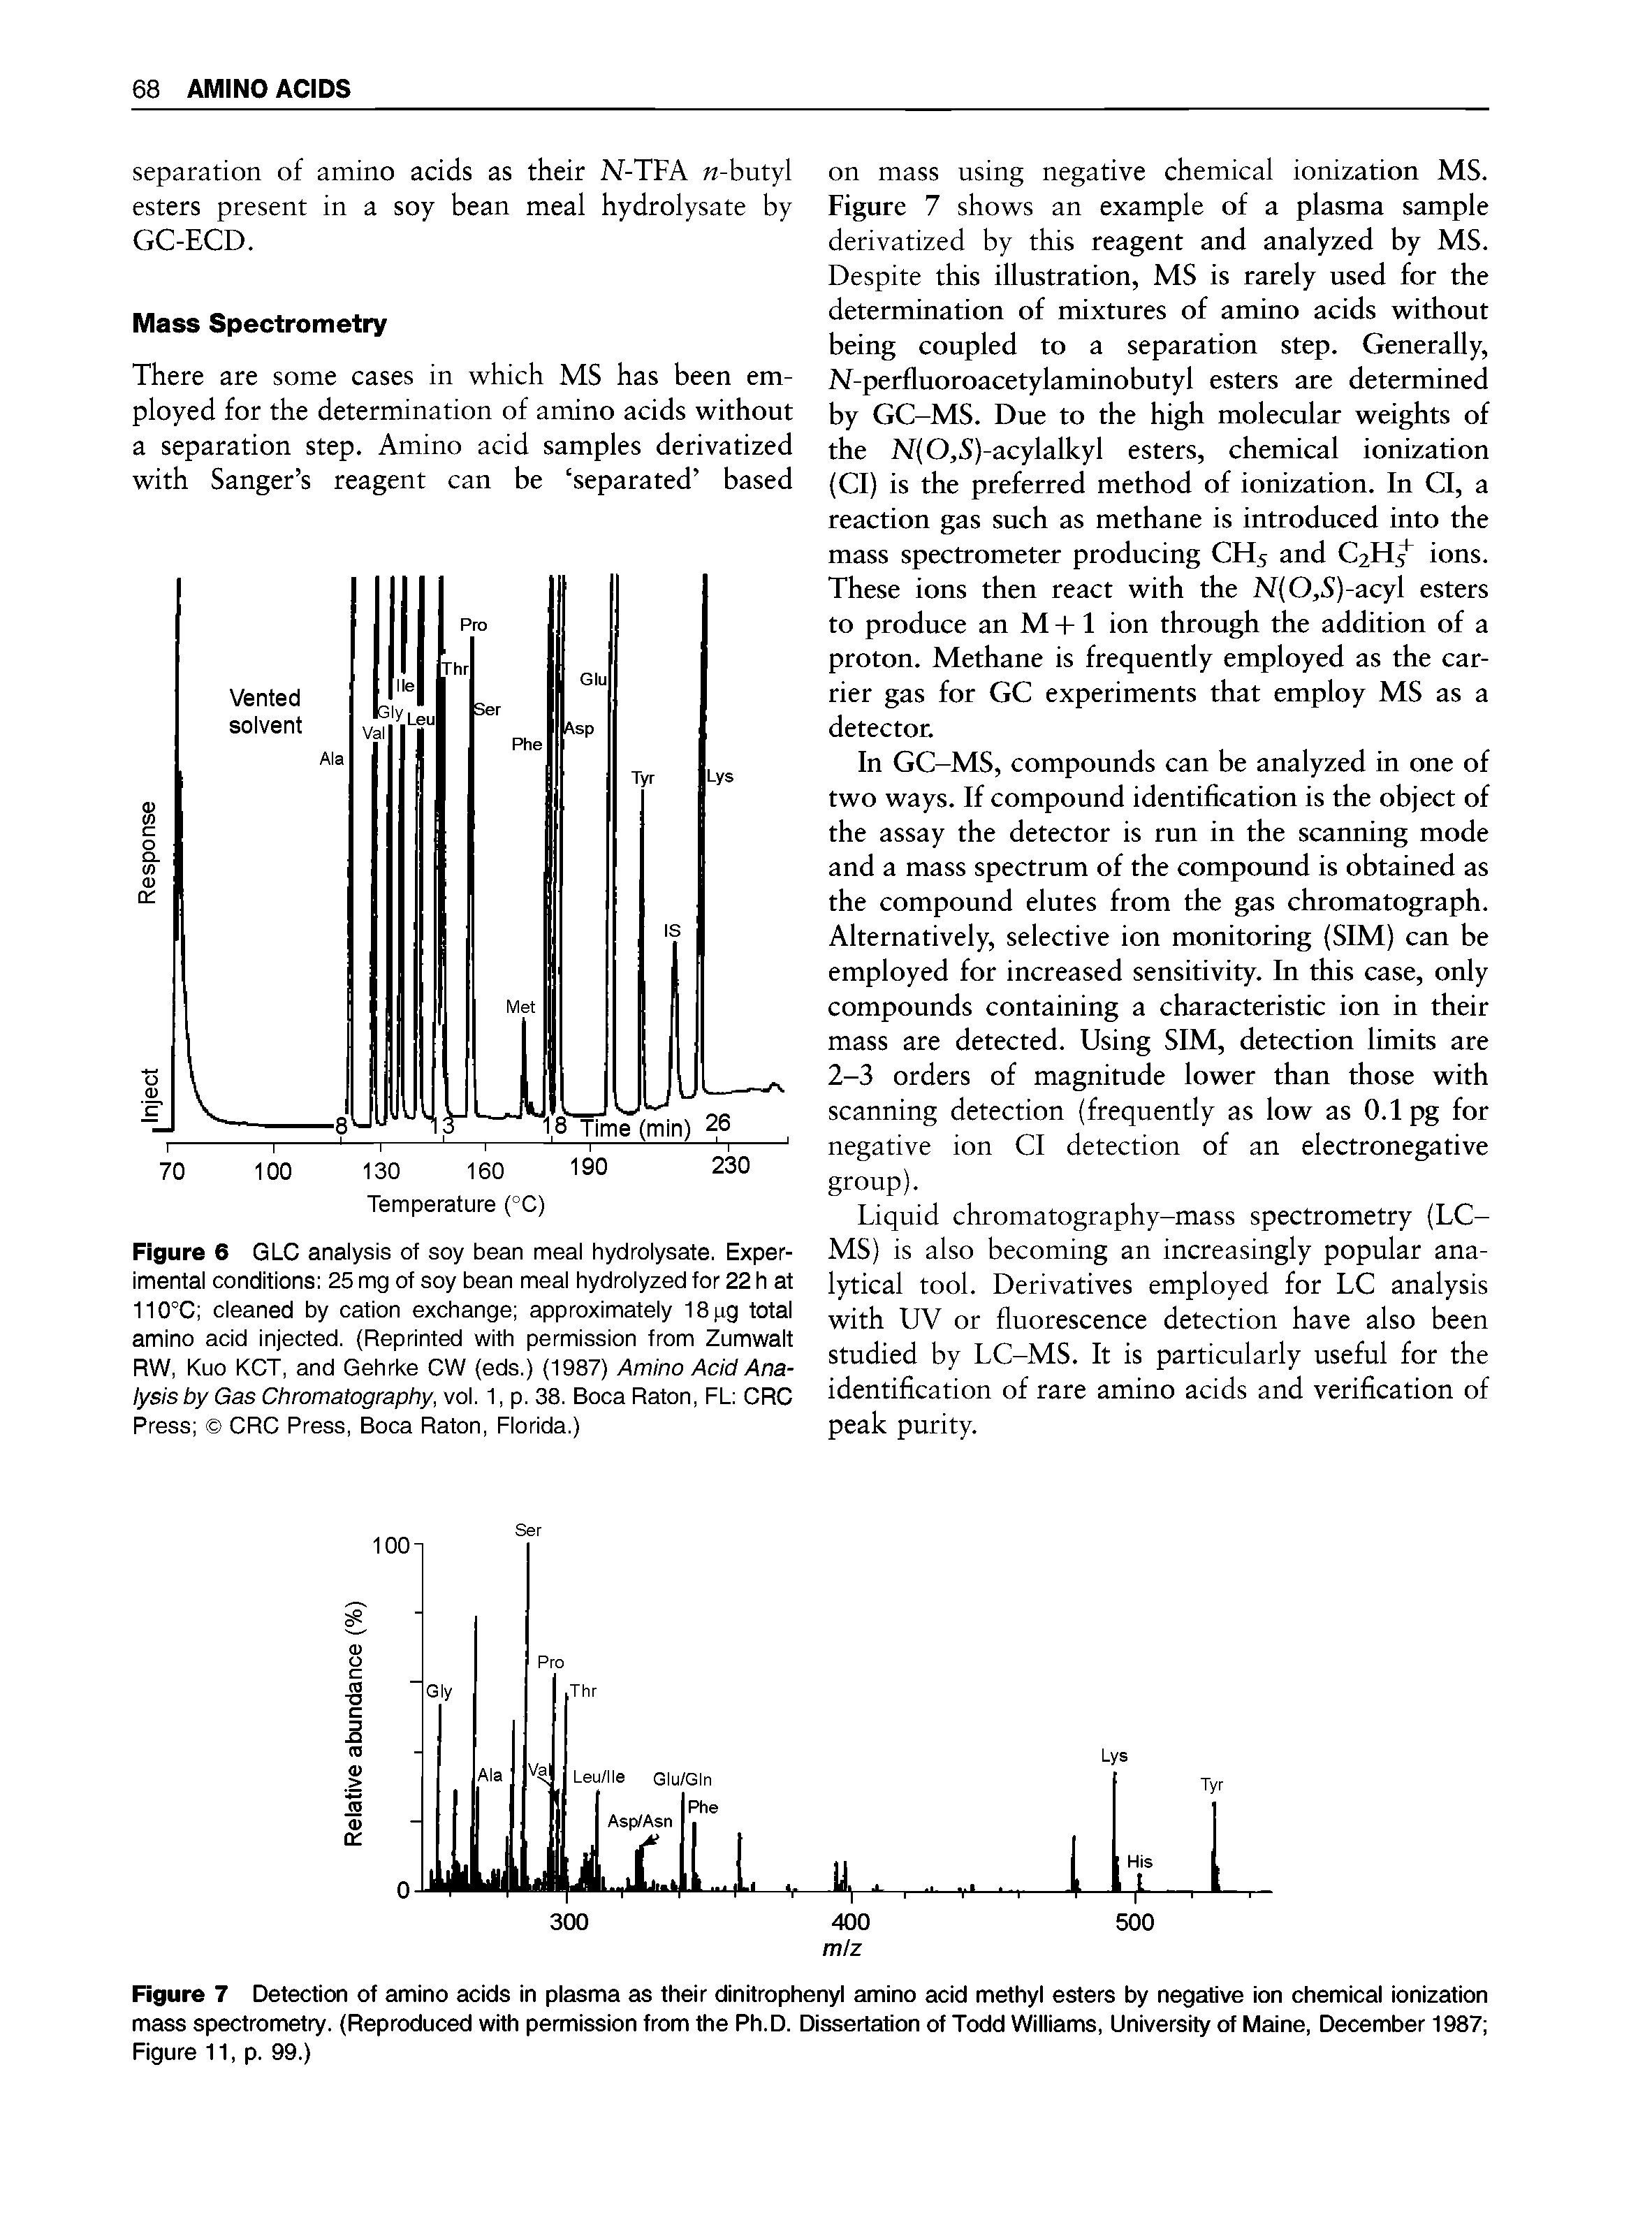 Figure 6 GLC analysis of soy bean meal hydrolysate. Experimental conditions 25 mg of soy bean meal hydrolyzed for 22 h at 110°C cleaned by cation exchange approximately 18pg total amino acid injected. (Reprinted with permission from Zumwalt RW, Kuo KCT, and Gehrke CW (eds.) (1987) Amino Acid Analysis by Gas Chromatography, vol. 1, p. 38. Boca Raton, FL CRC Press CRC Press, Boca Raton, Florida.)...